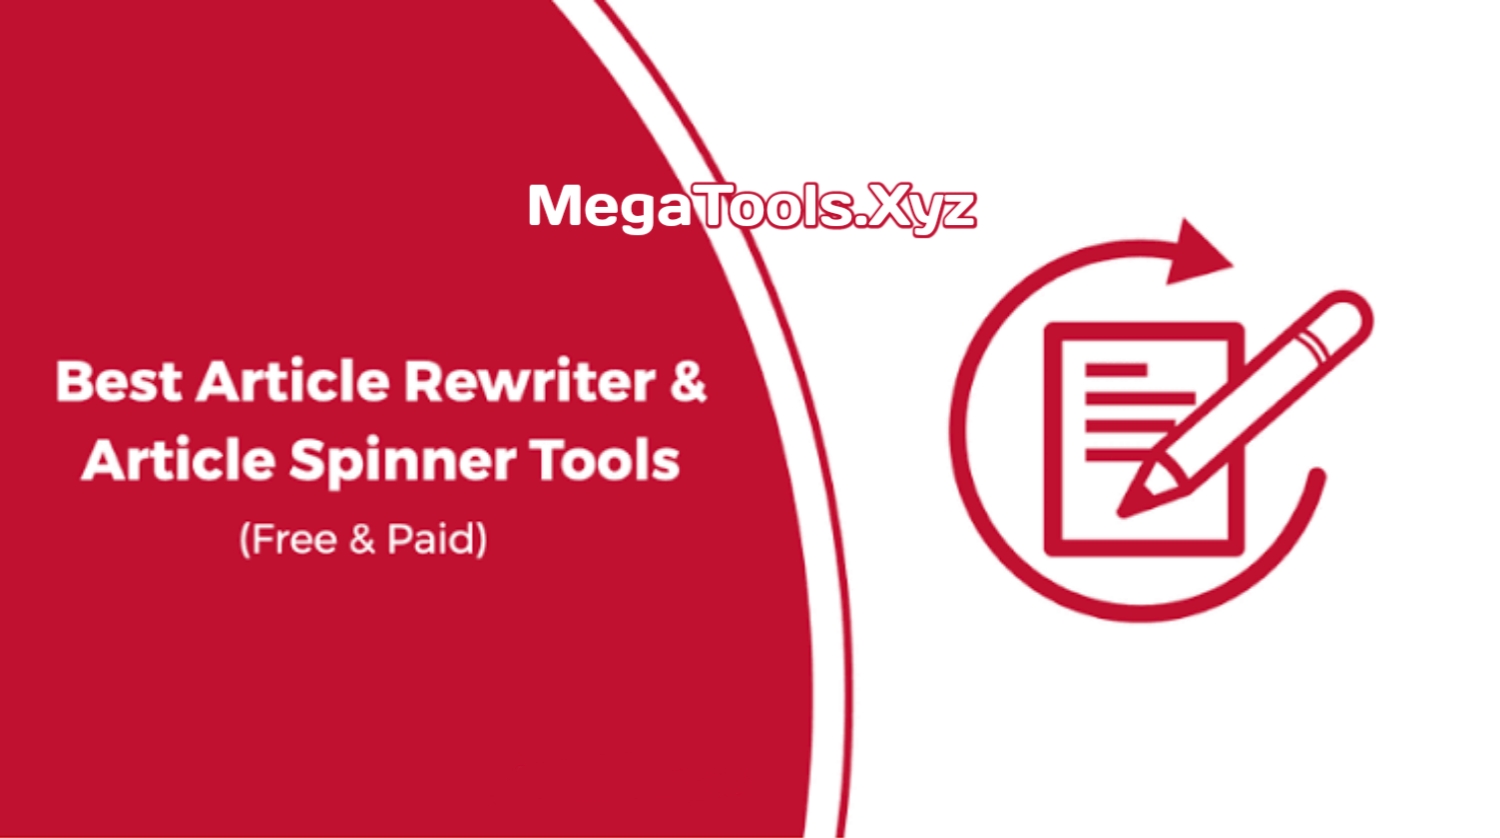 What is Rewrite Article tools?